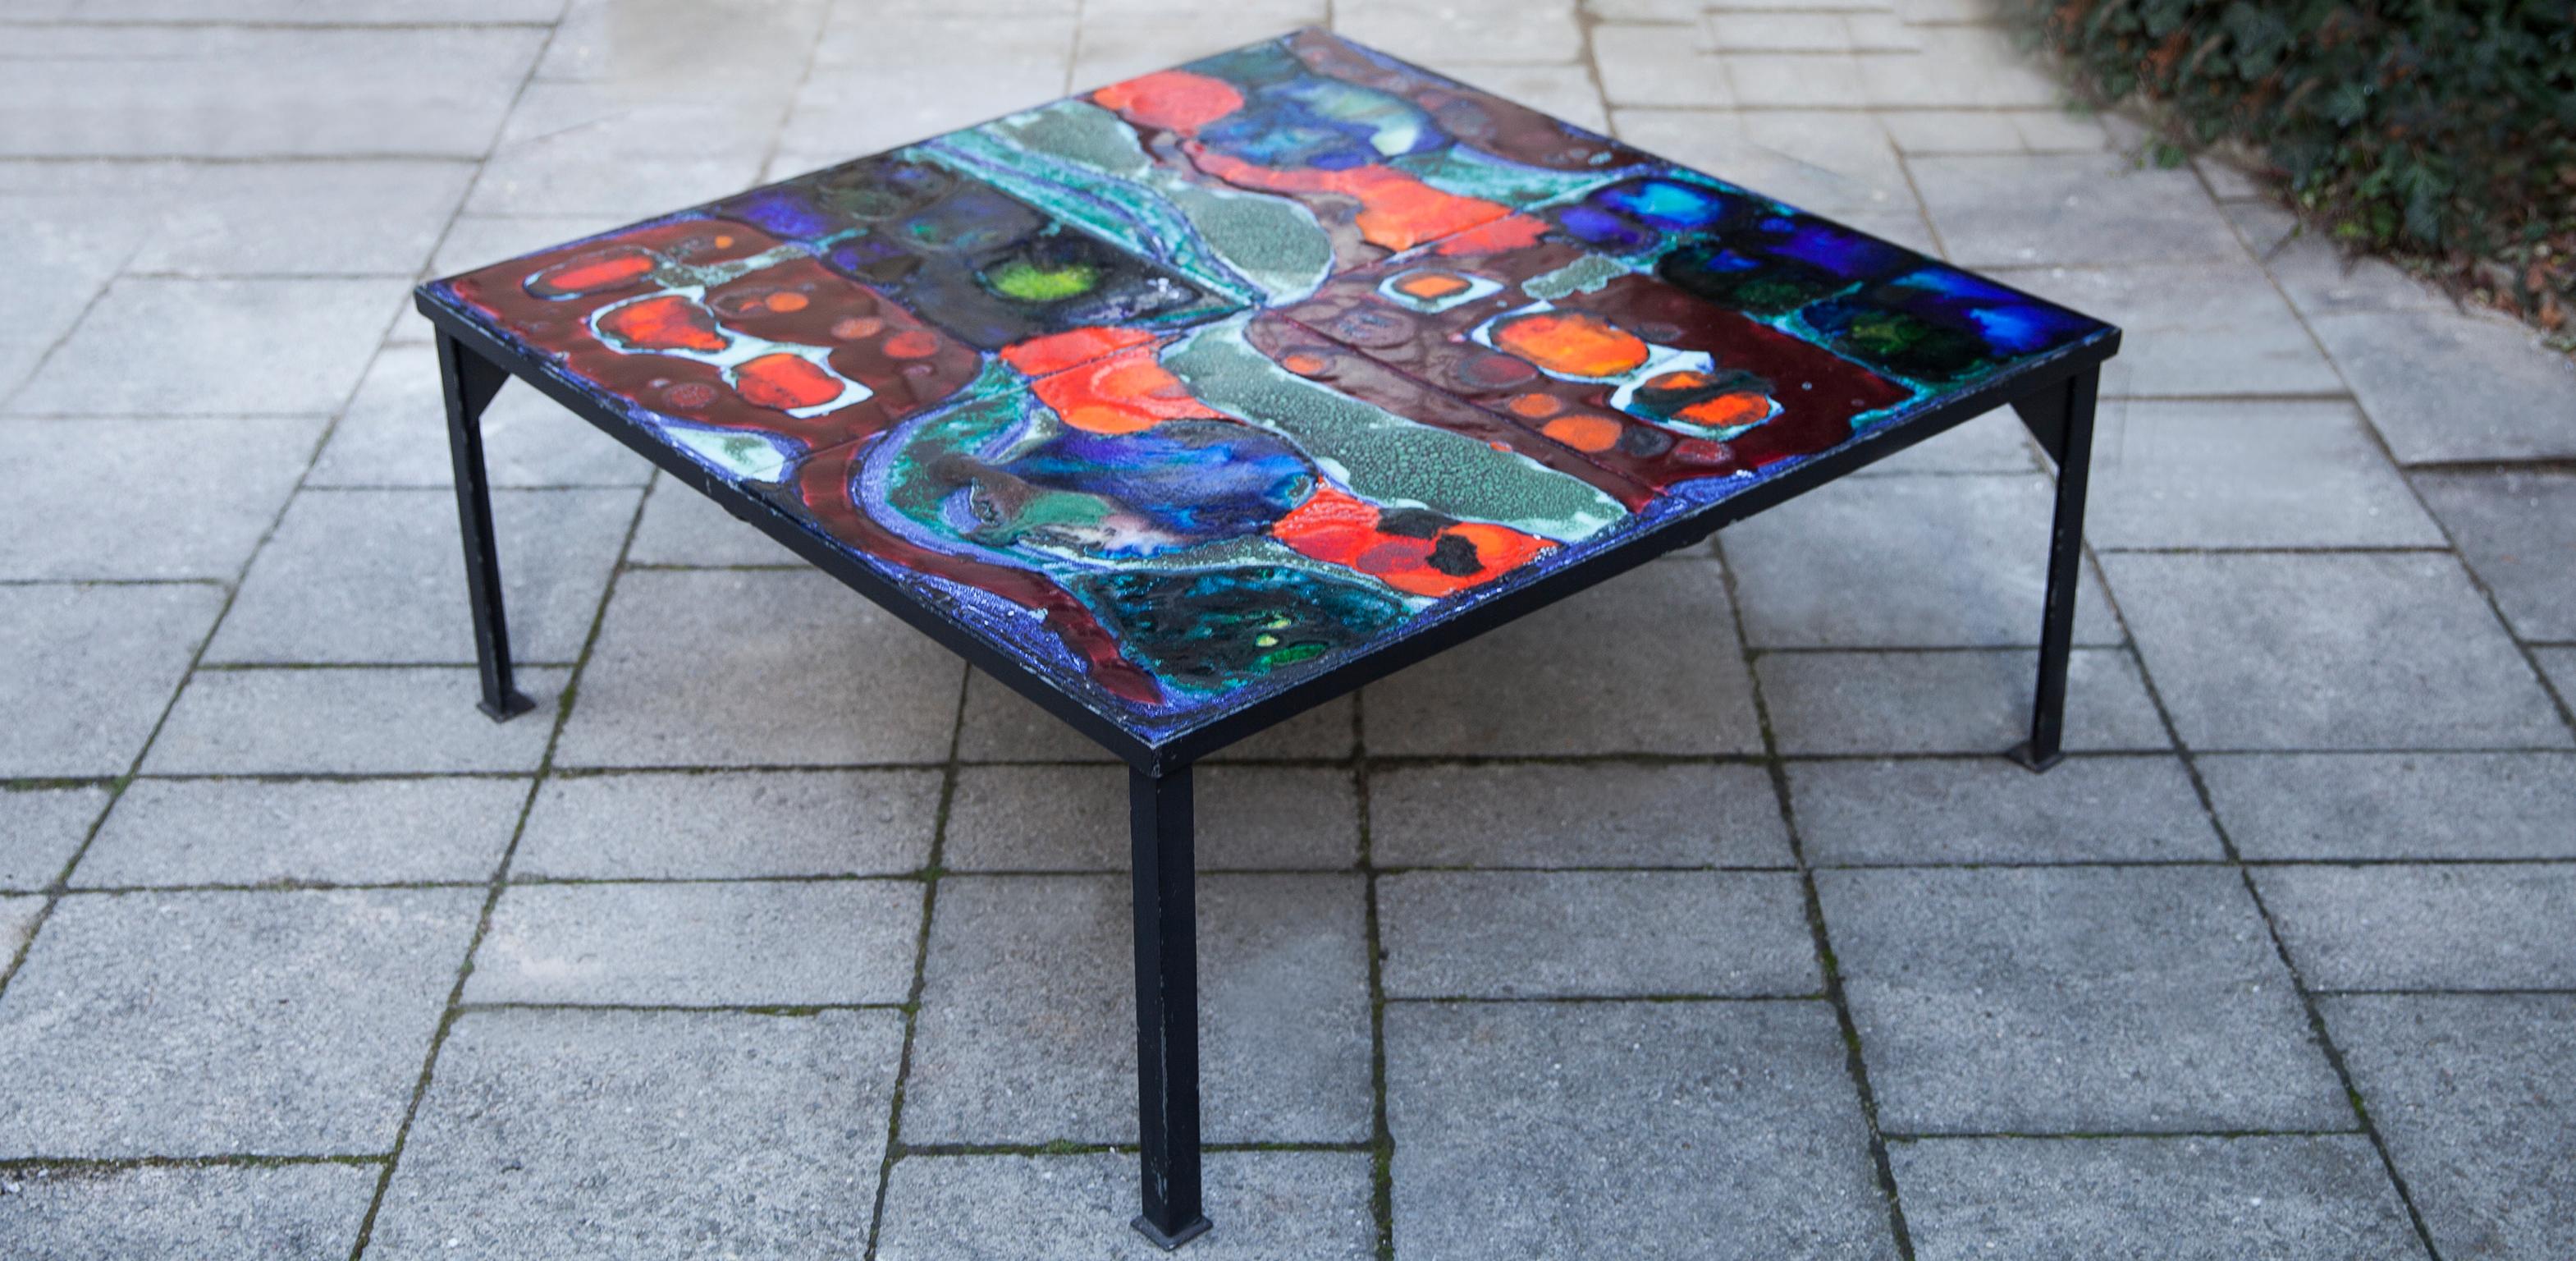 Hanns Altmeier Colorful Ceramic Square Coffee Table, Germany, 1960 In Good Condition For Sale In Munich, DE